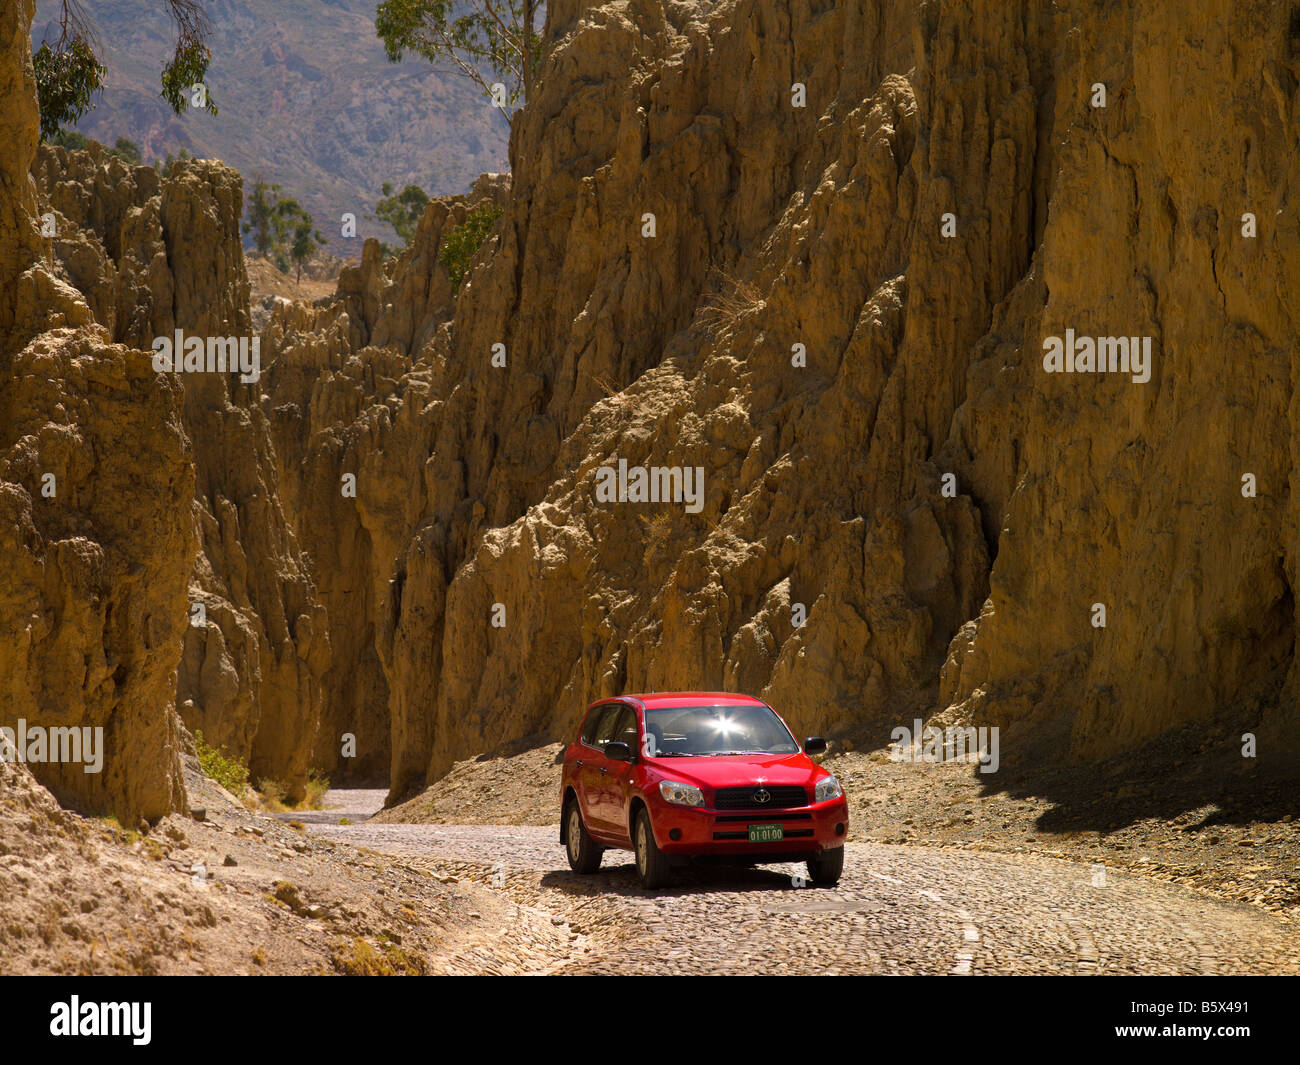 Red car winding road yellow rocky mountain trip touristic peak curve landscape horizontal 4x4 truck panoramic rout scenery view Stock Photo